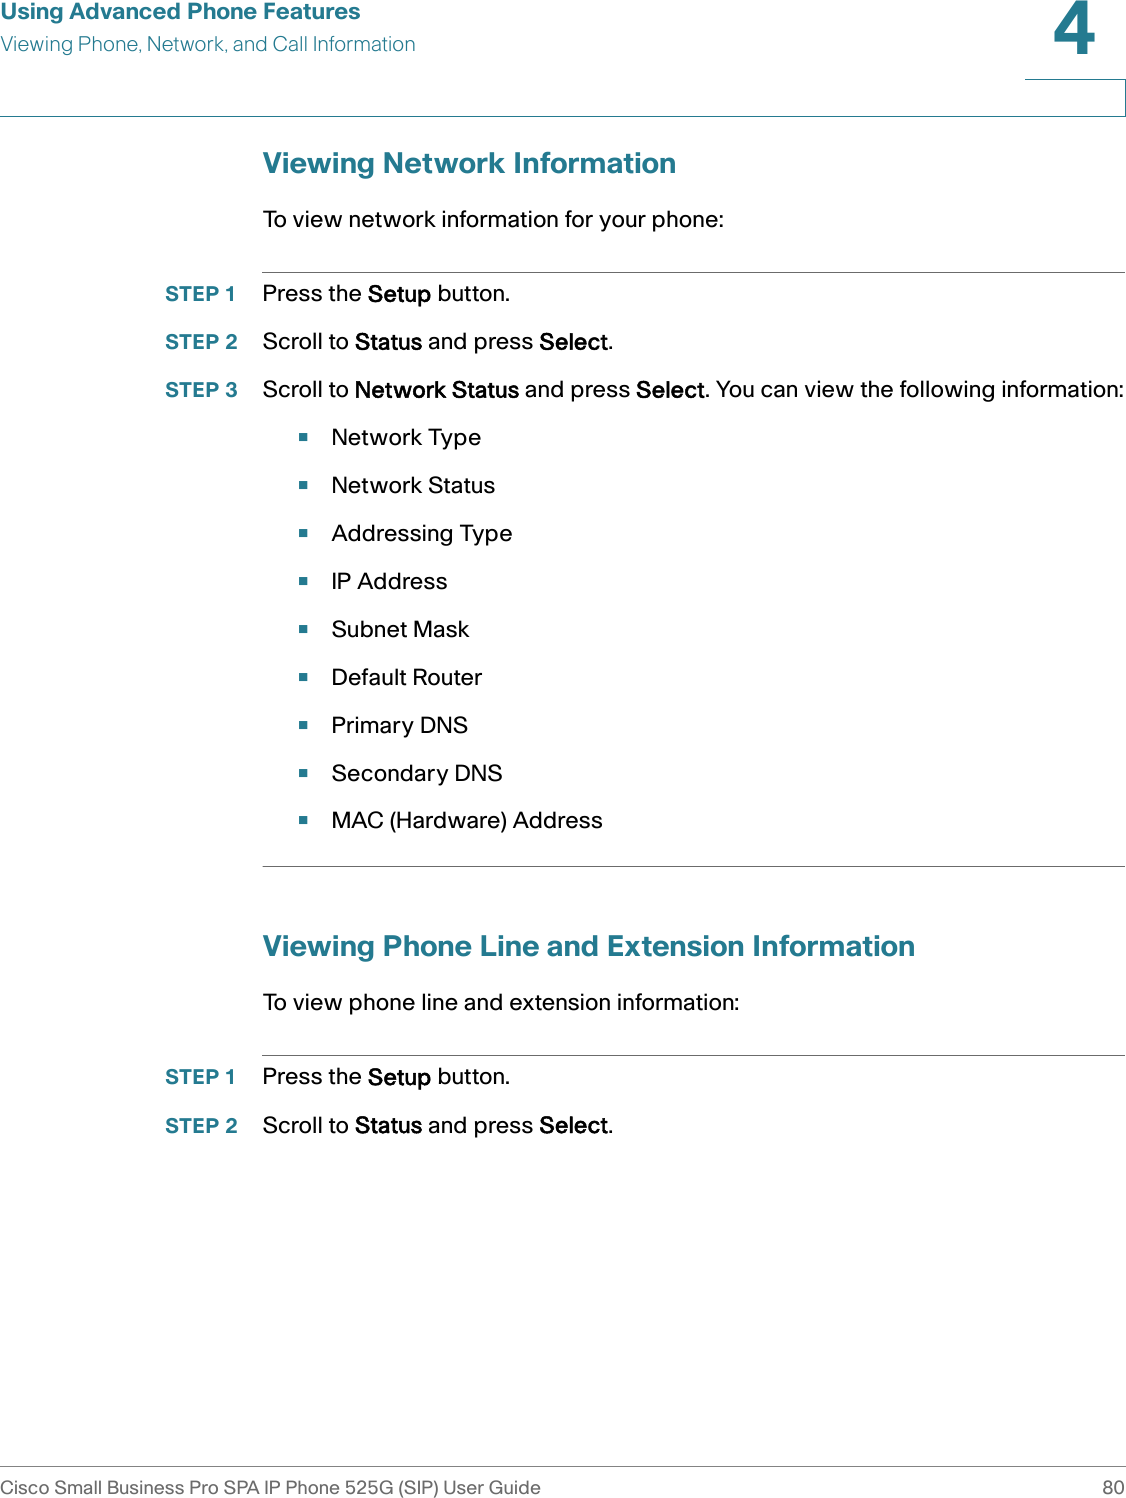 Using Advanced Phone FeaturesViewing Phone, Network, and Call InformationCisco Small Business Pro SPA IP Phone 525G (SIP) User Guide 804 Viewing Network InformationTo view network information for your phone:STEP 1 Press the Setup button.STEP 2 Scroll to Status and press Select.STEP 3 Scroll to Network Status and press Select. You can view the following information:•Network Type•Network Status•Addressing Type•IP Address•Subnet Mask•Default Router•Primary DNS•Secondary DNS•MAC (Hardware) AddressViewing Phone Line and Extension InformationTo view phone line and extension information:STEP 1 Press the Setup button.STEP 2 Scroll to Status and press Select.